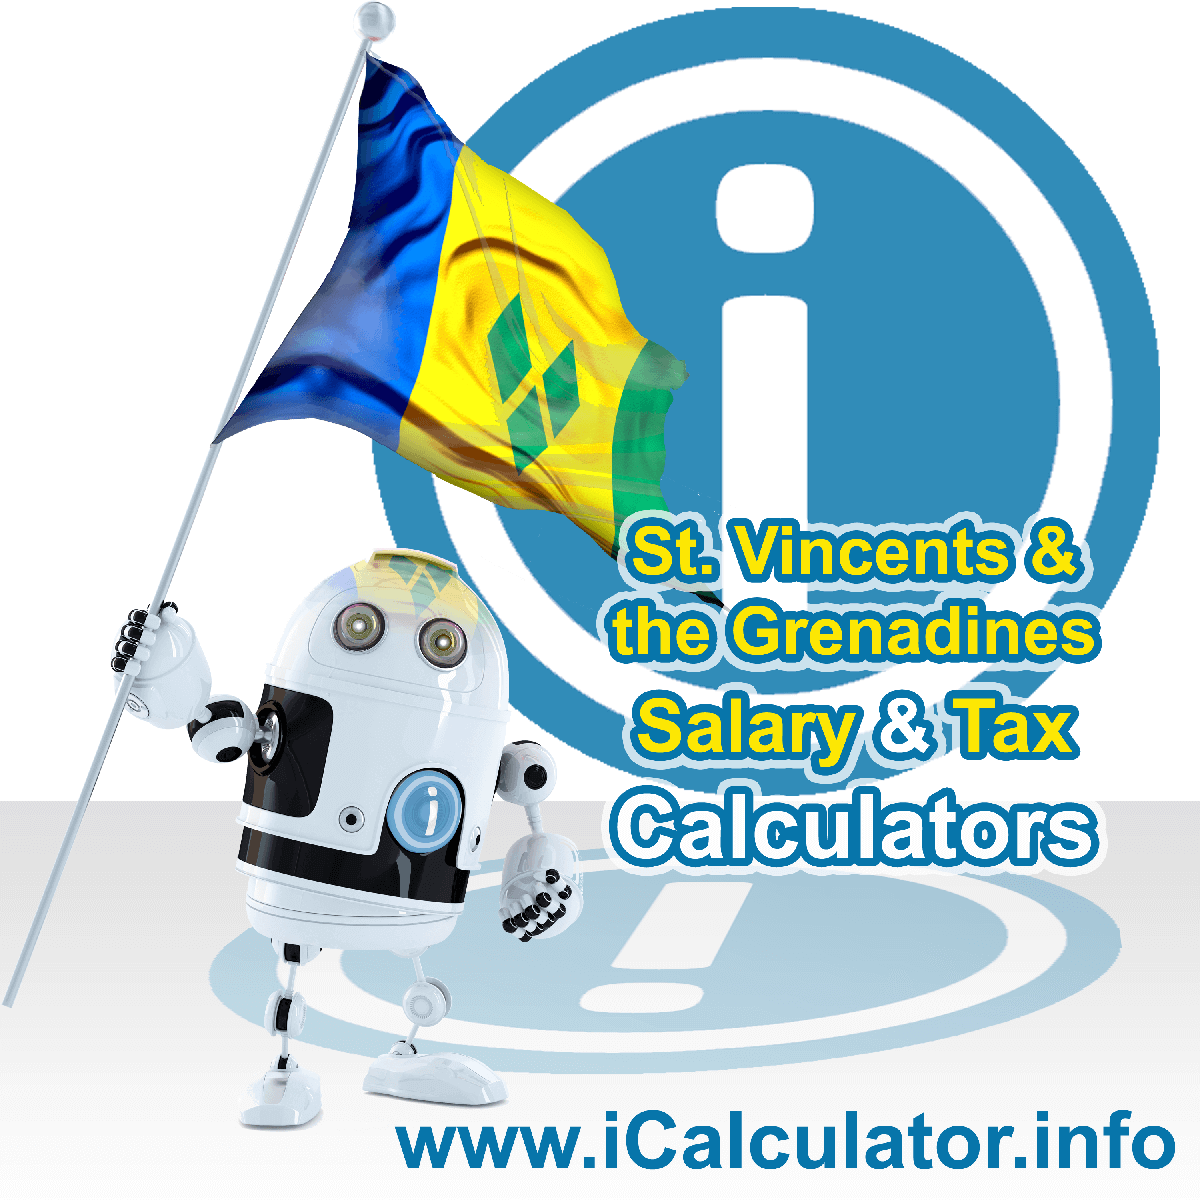 Saint Vincent And The Grenadines Salary Calculator. This image shows the Saint Vincent And The Grenadinesese flag and information relating to the tax formula for the Saint Vincent And The Grenadines Tax Calculator